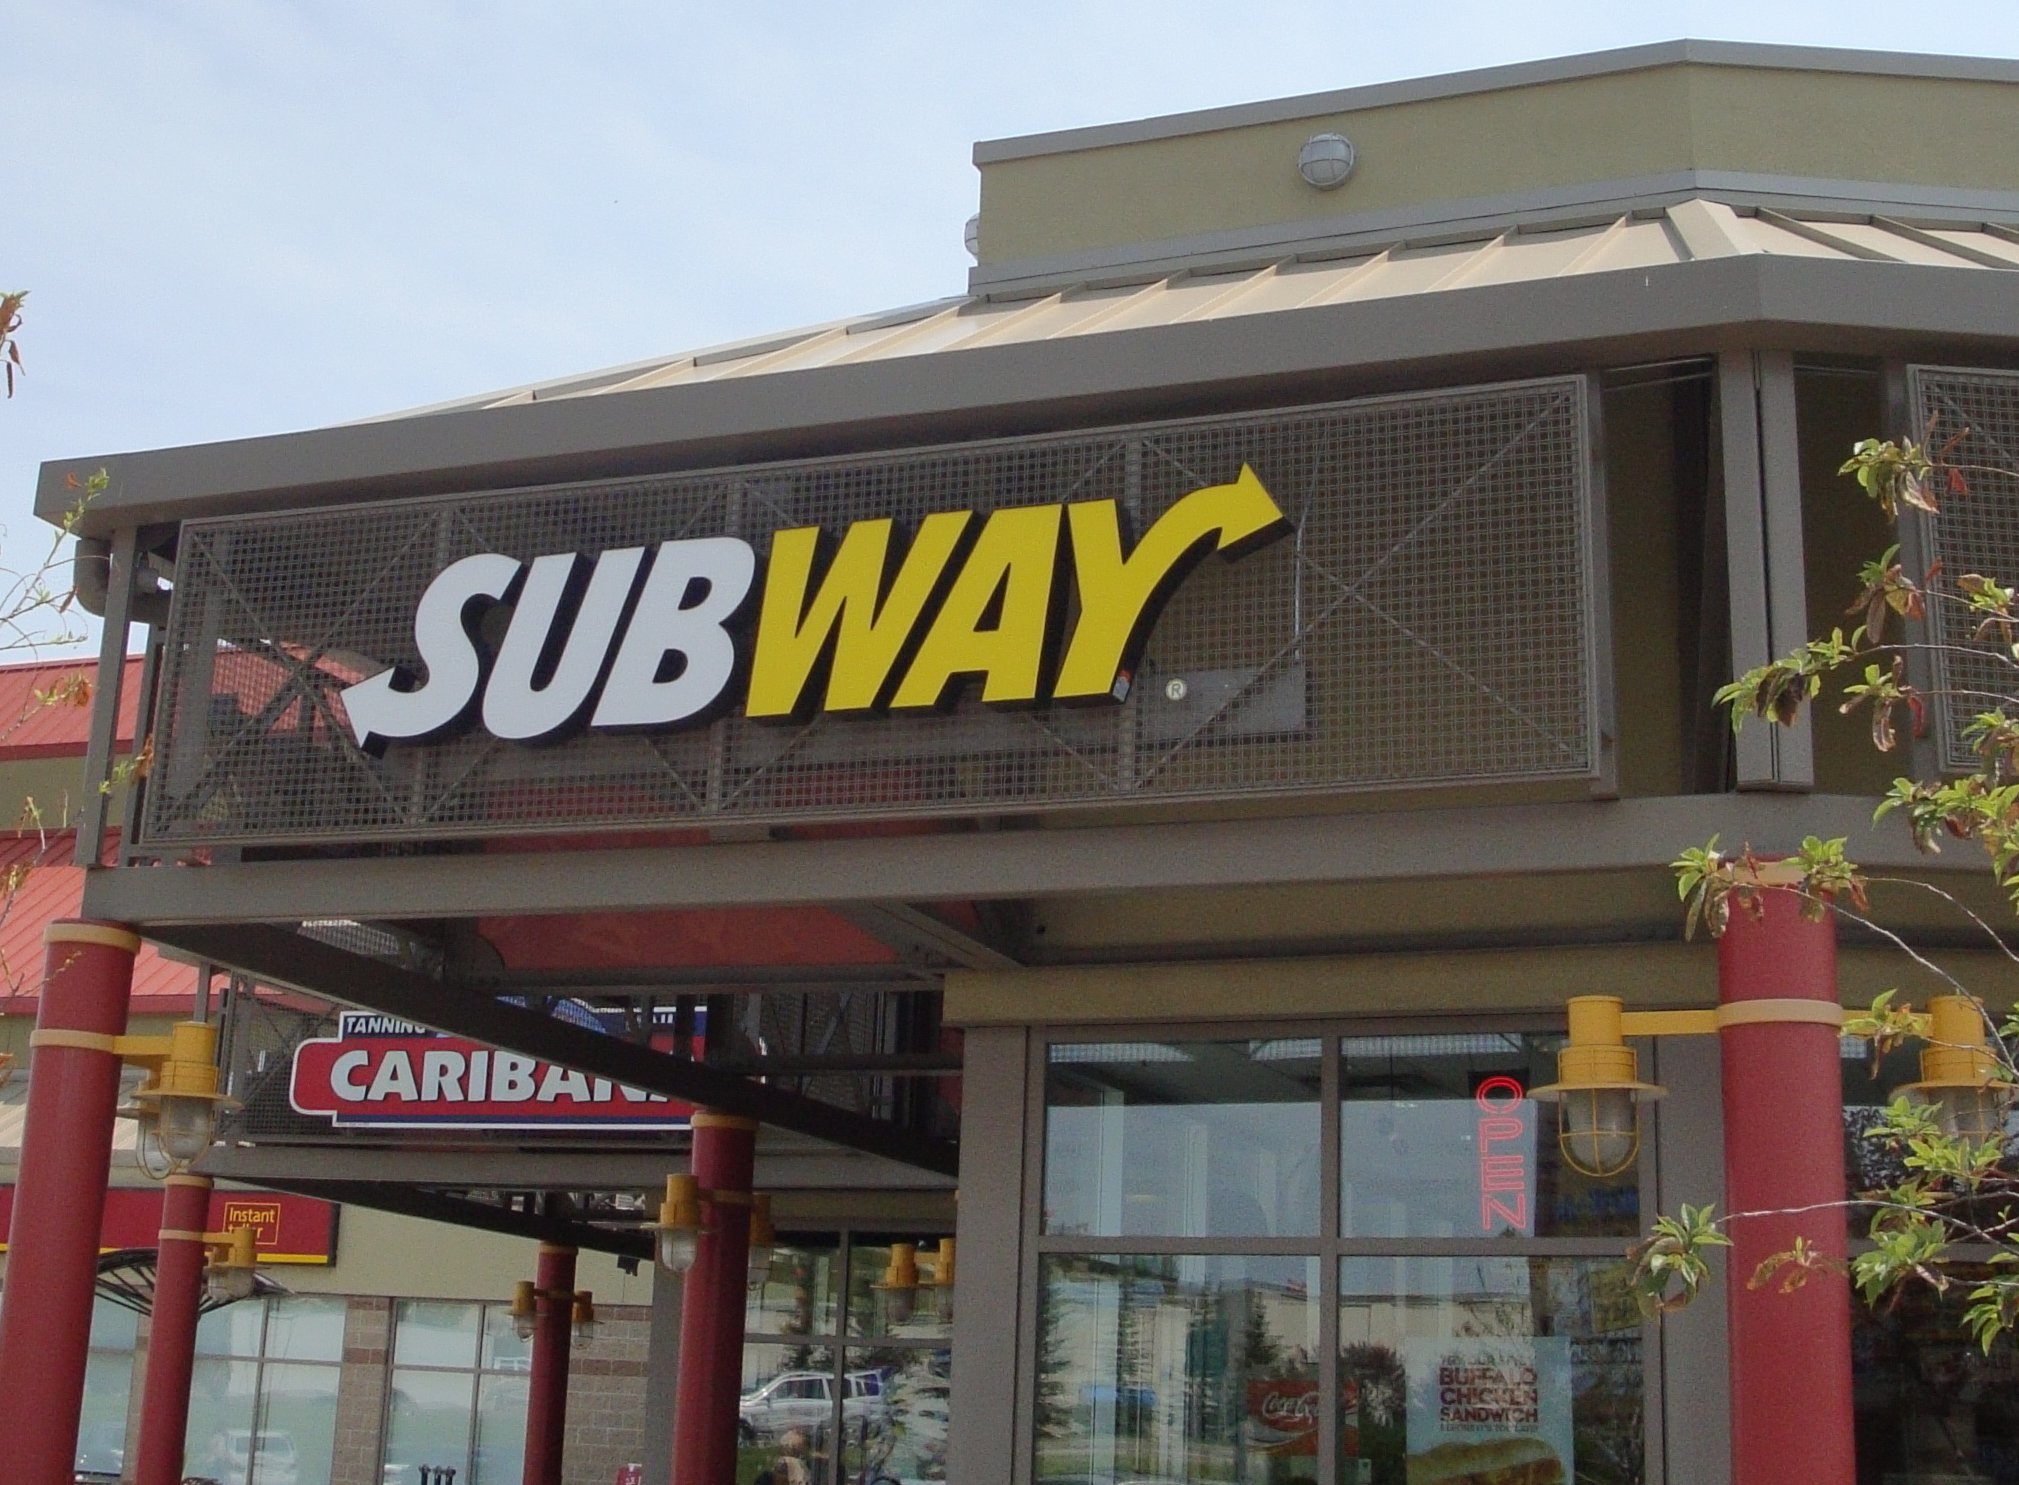 Store front for Subway